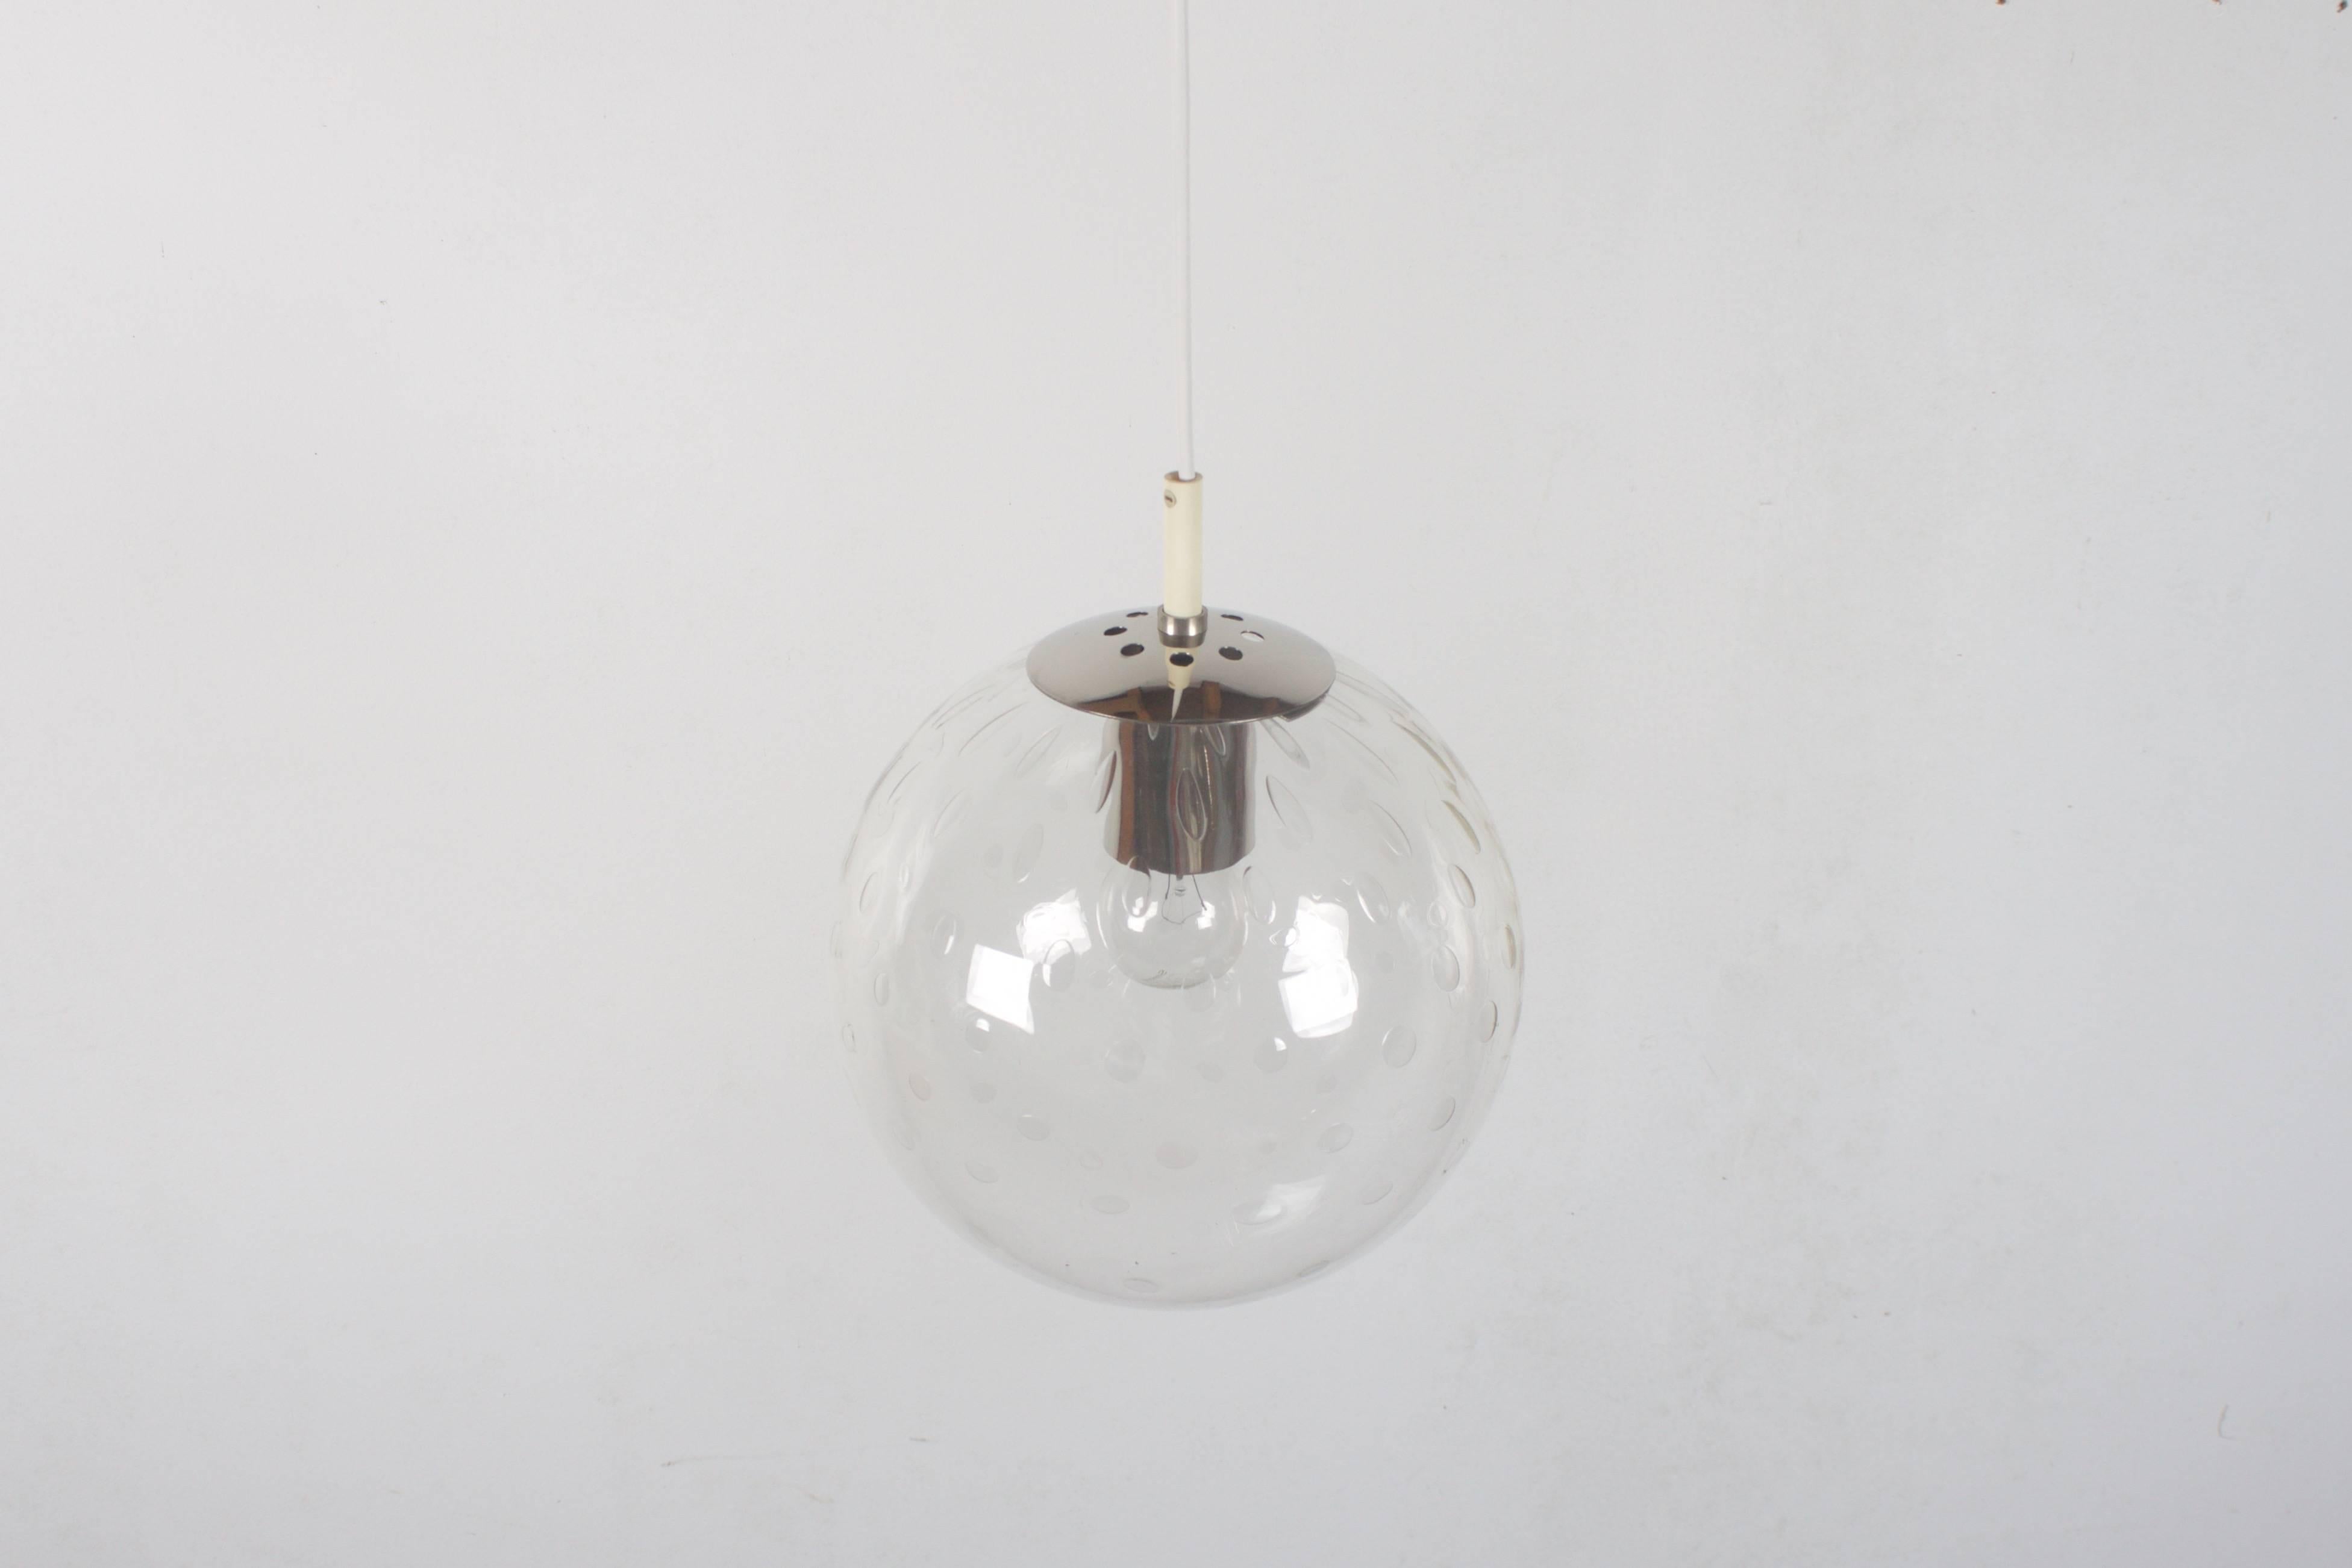 Beautiful ‘Light-drops’ pendant by RAAK Amsterdam in very good condition.

Six available. 

Handblown glass 25 cm. (9.85 Inch) globe with a teardrop pattern trapped inside the glass. 

The pattern in the globes creates a spectacular effect when